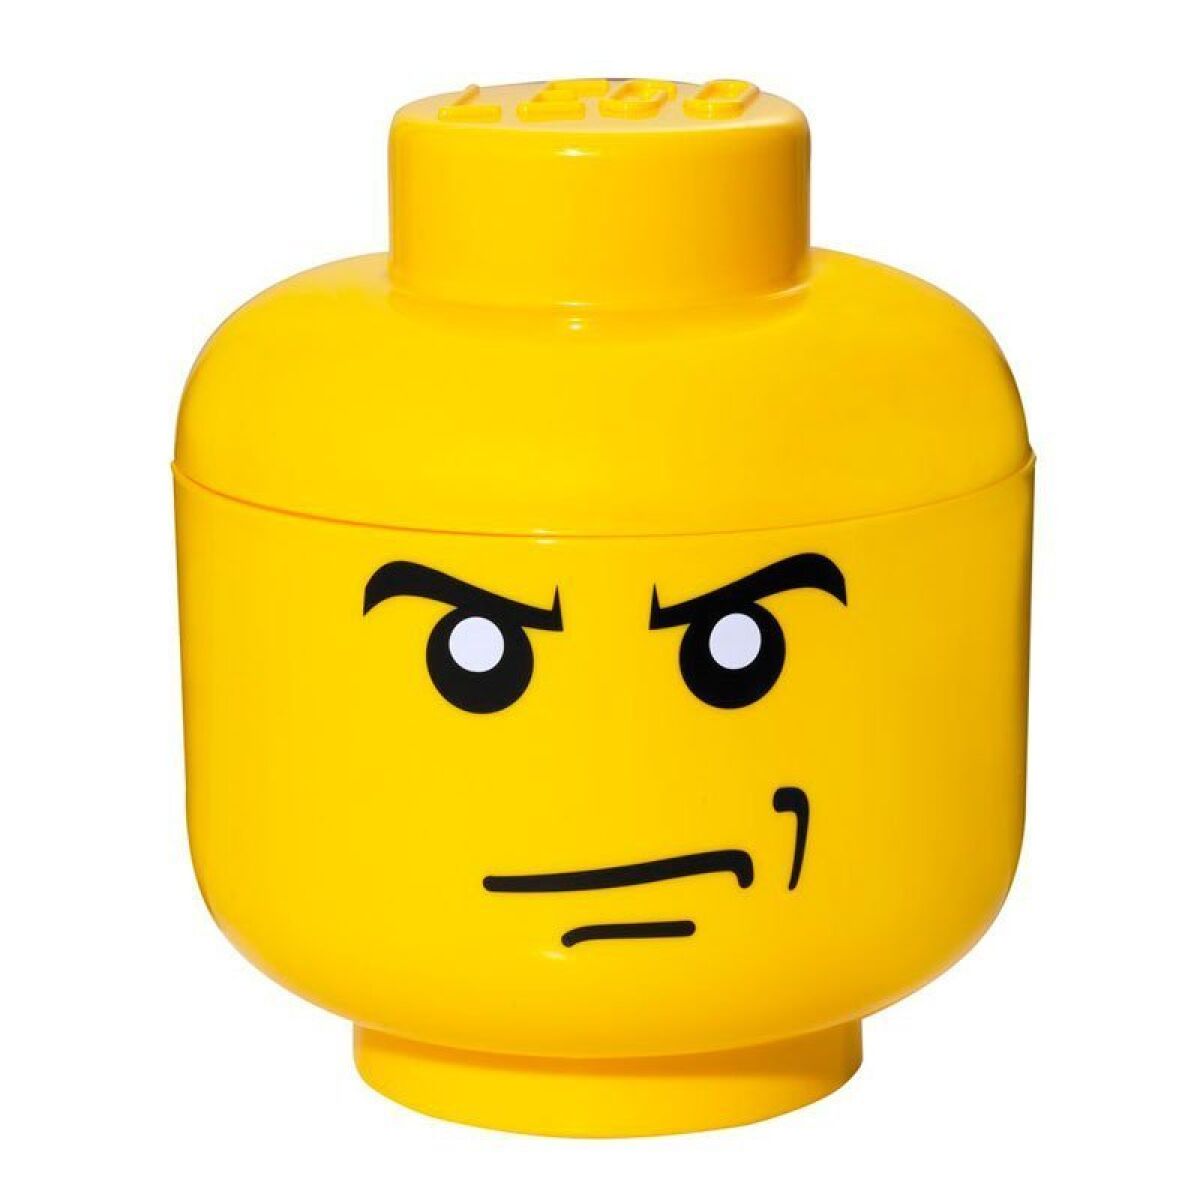 Not your father's Lego.